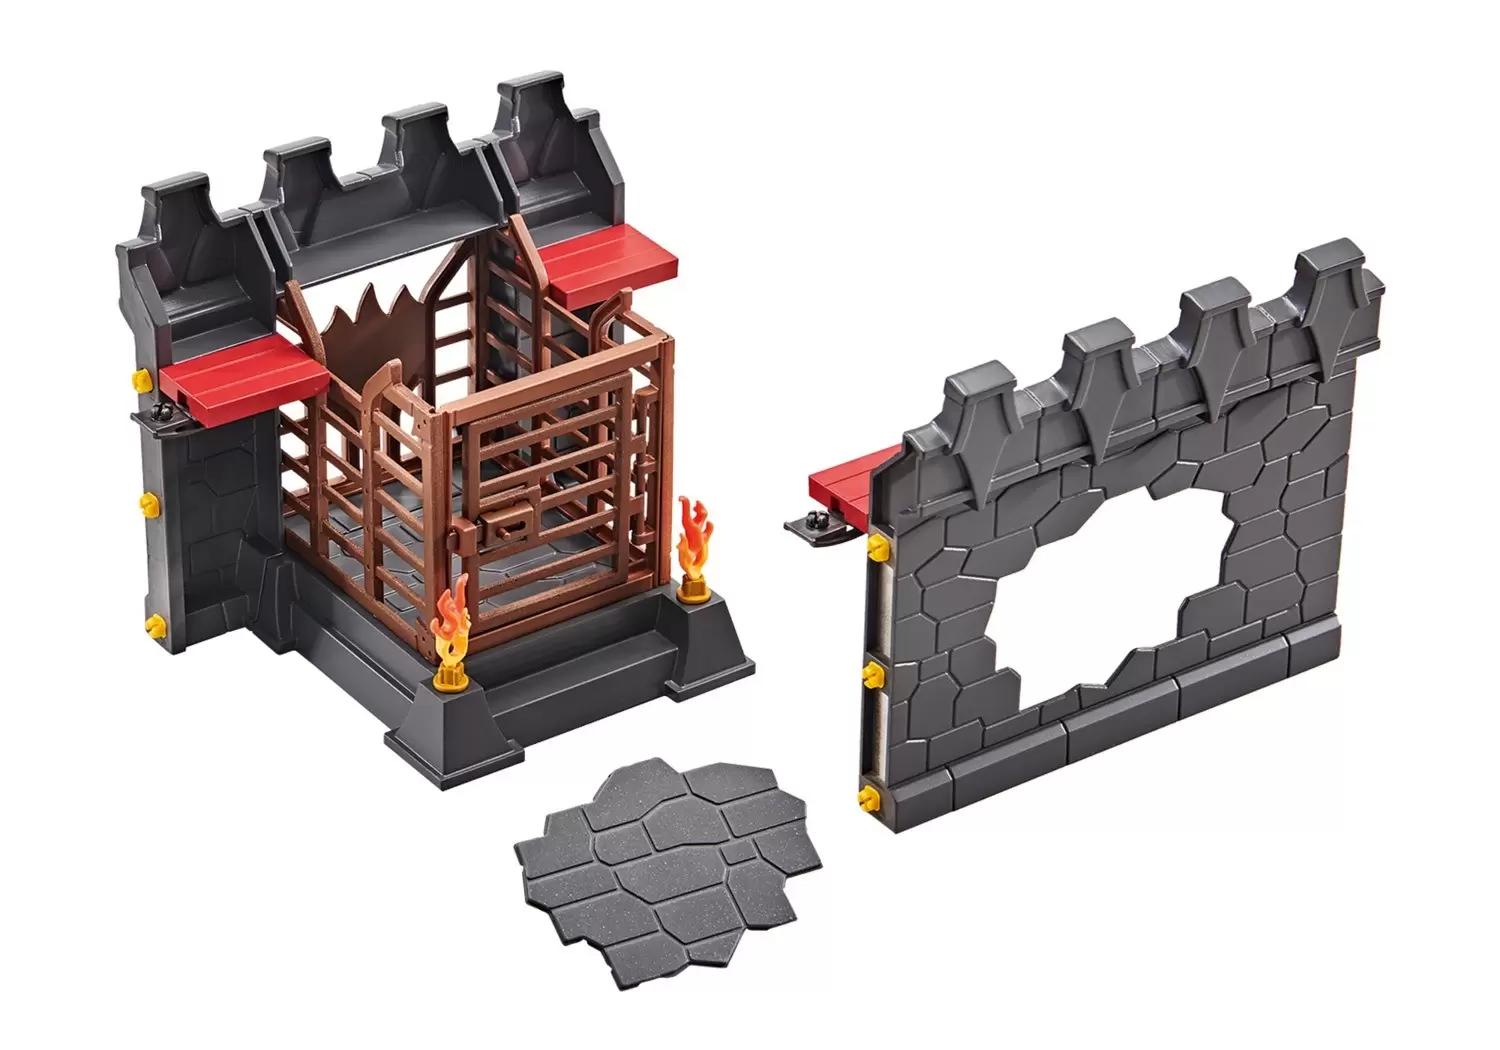 Playmobil Accessories & decorations - Wall extension with prison and wall breakthrough for the Burnham Raiders fortress